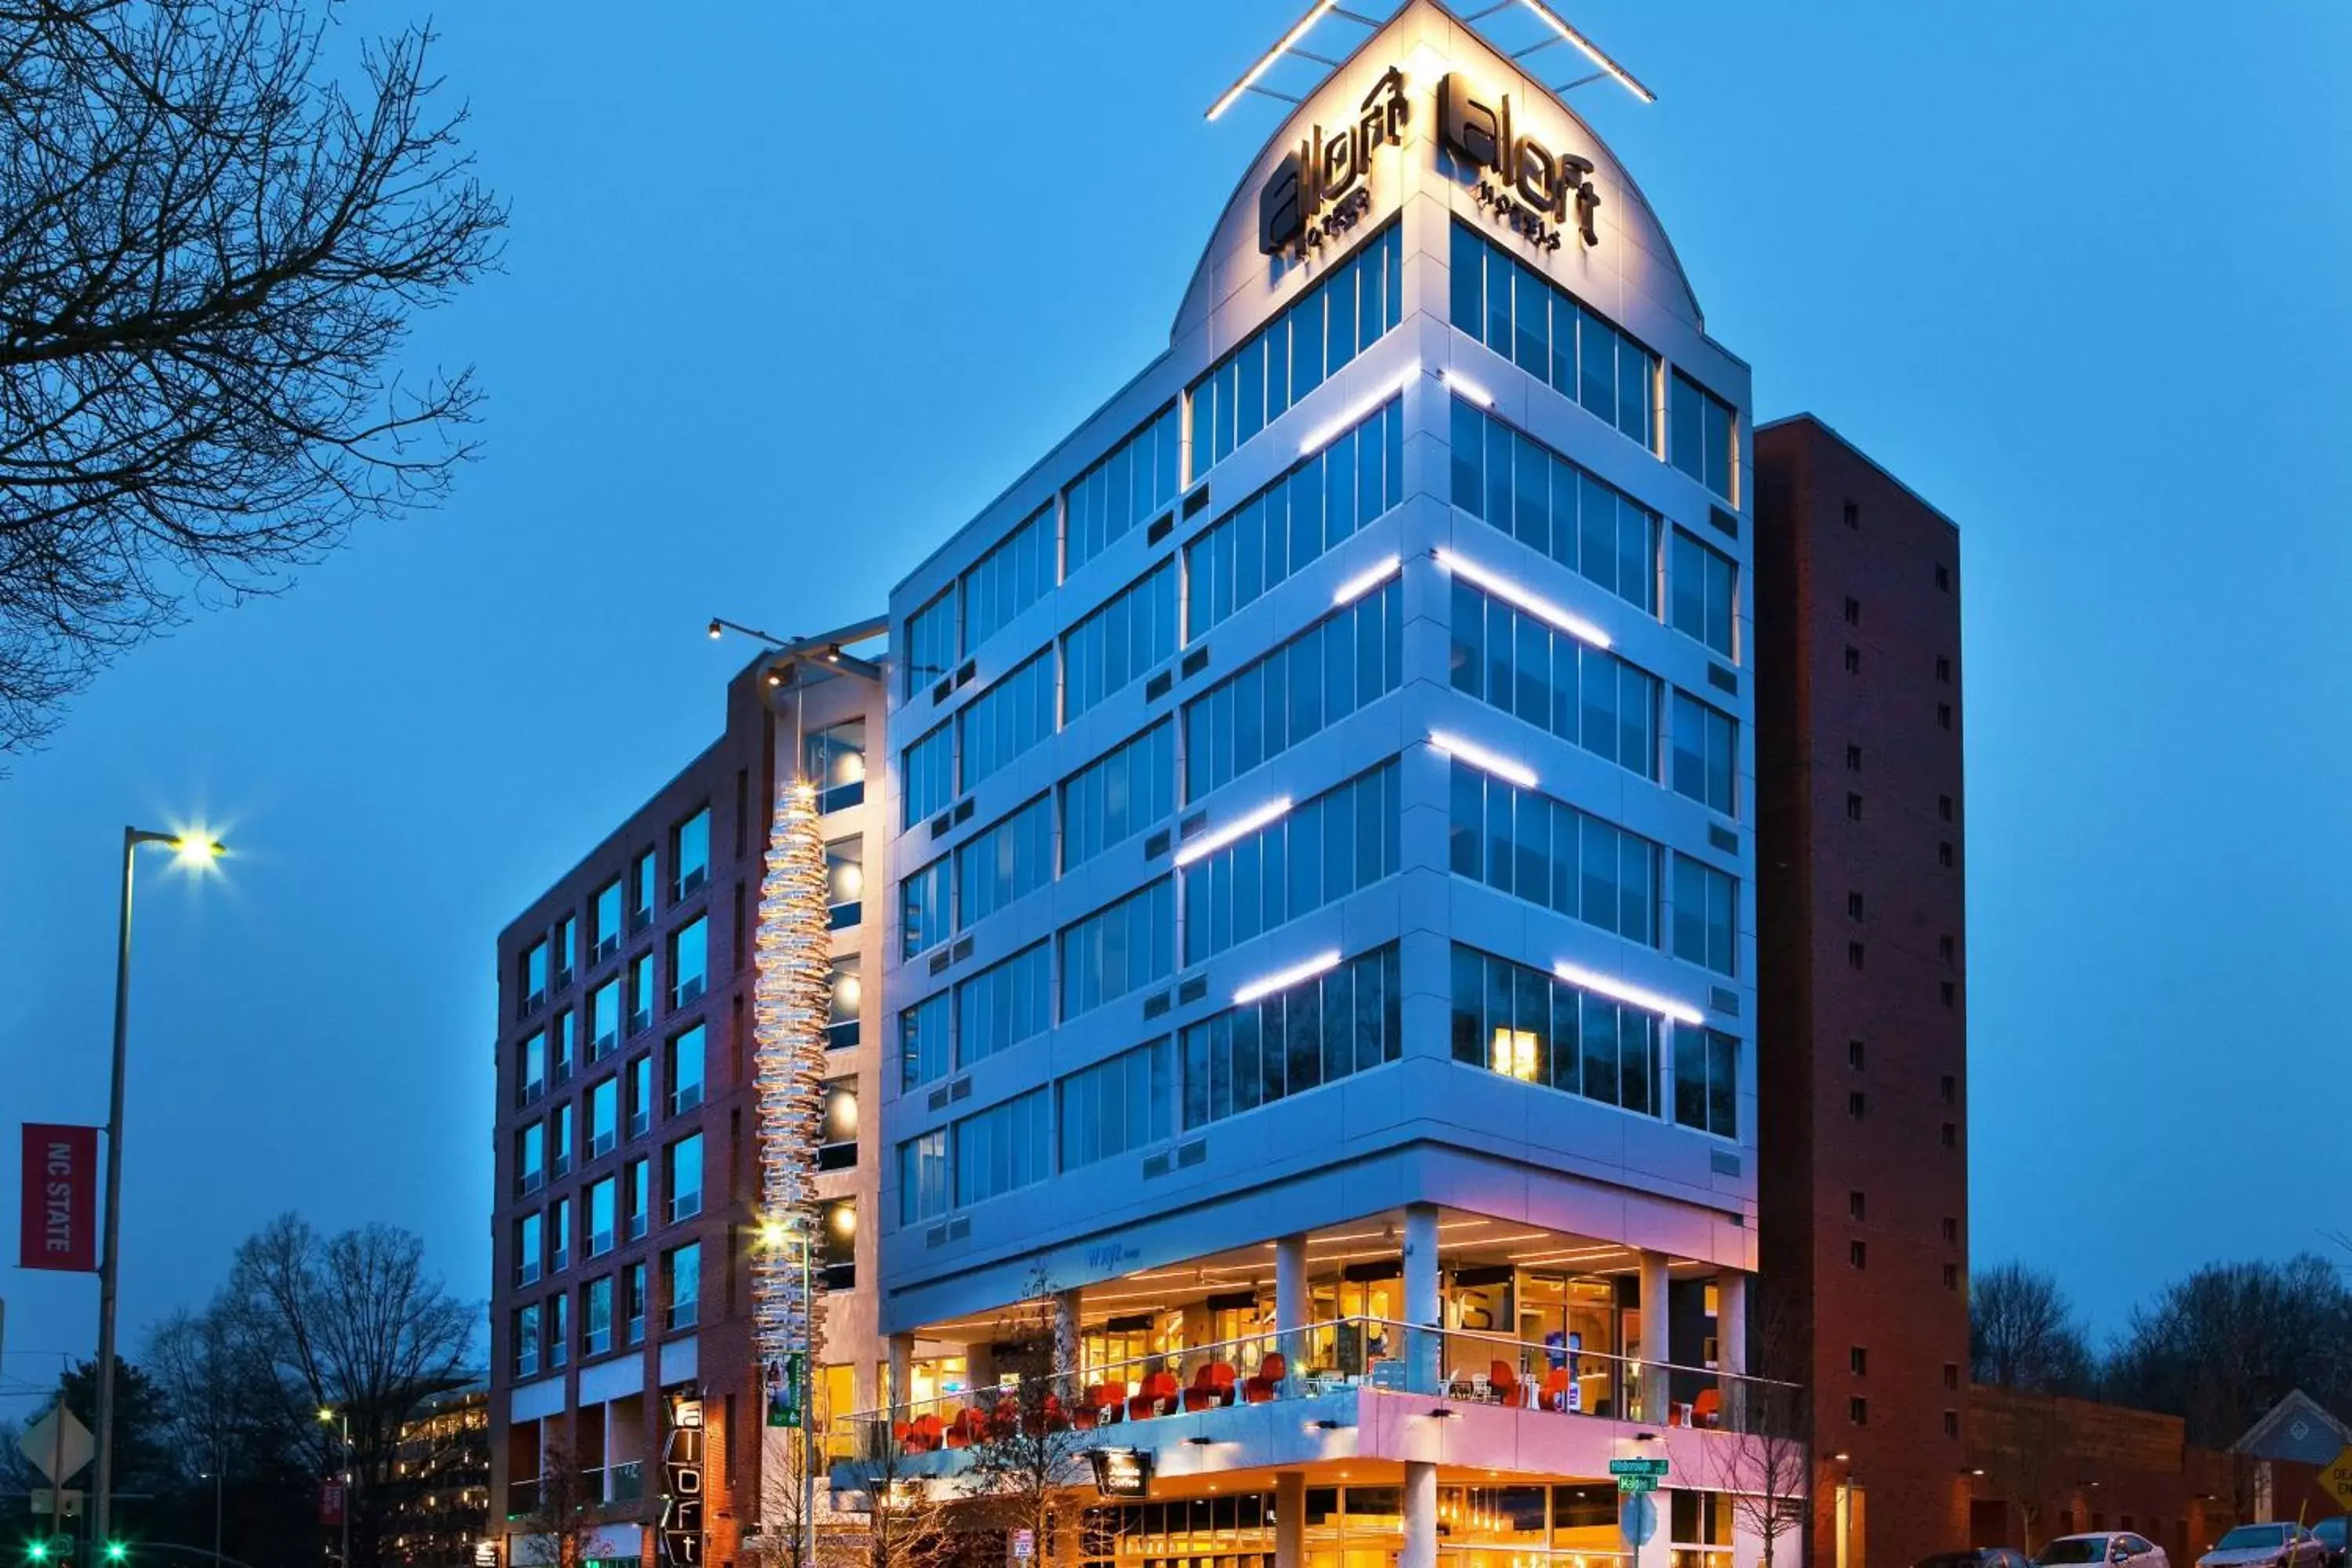 Property Building in Aloft Raleigh